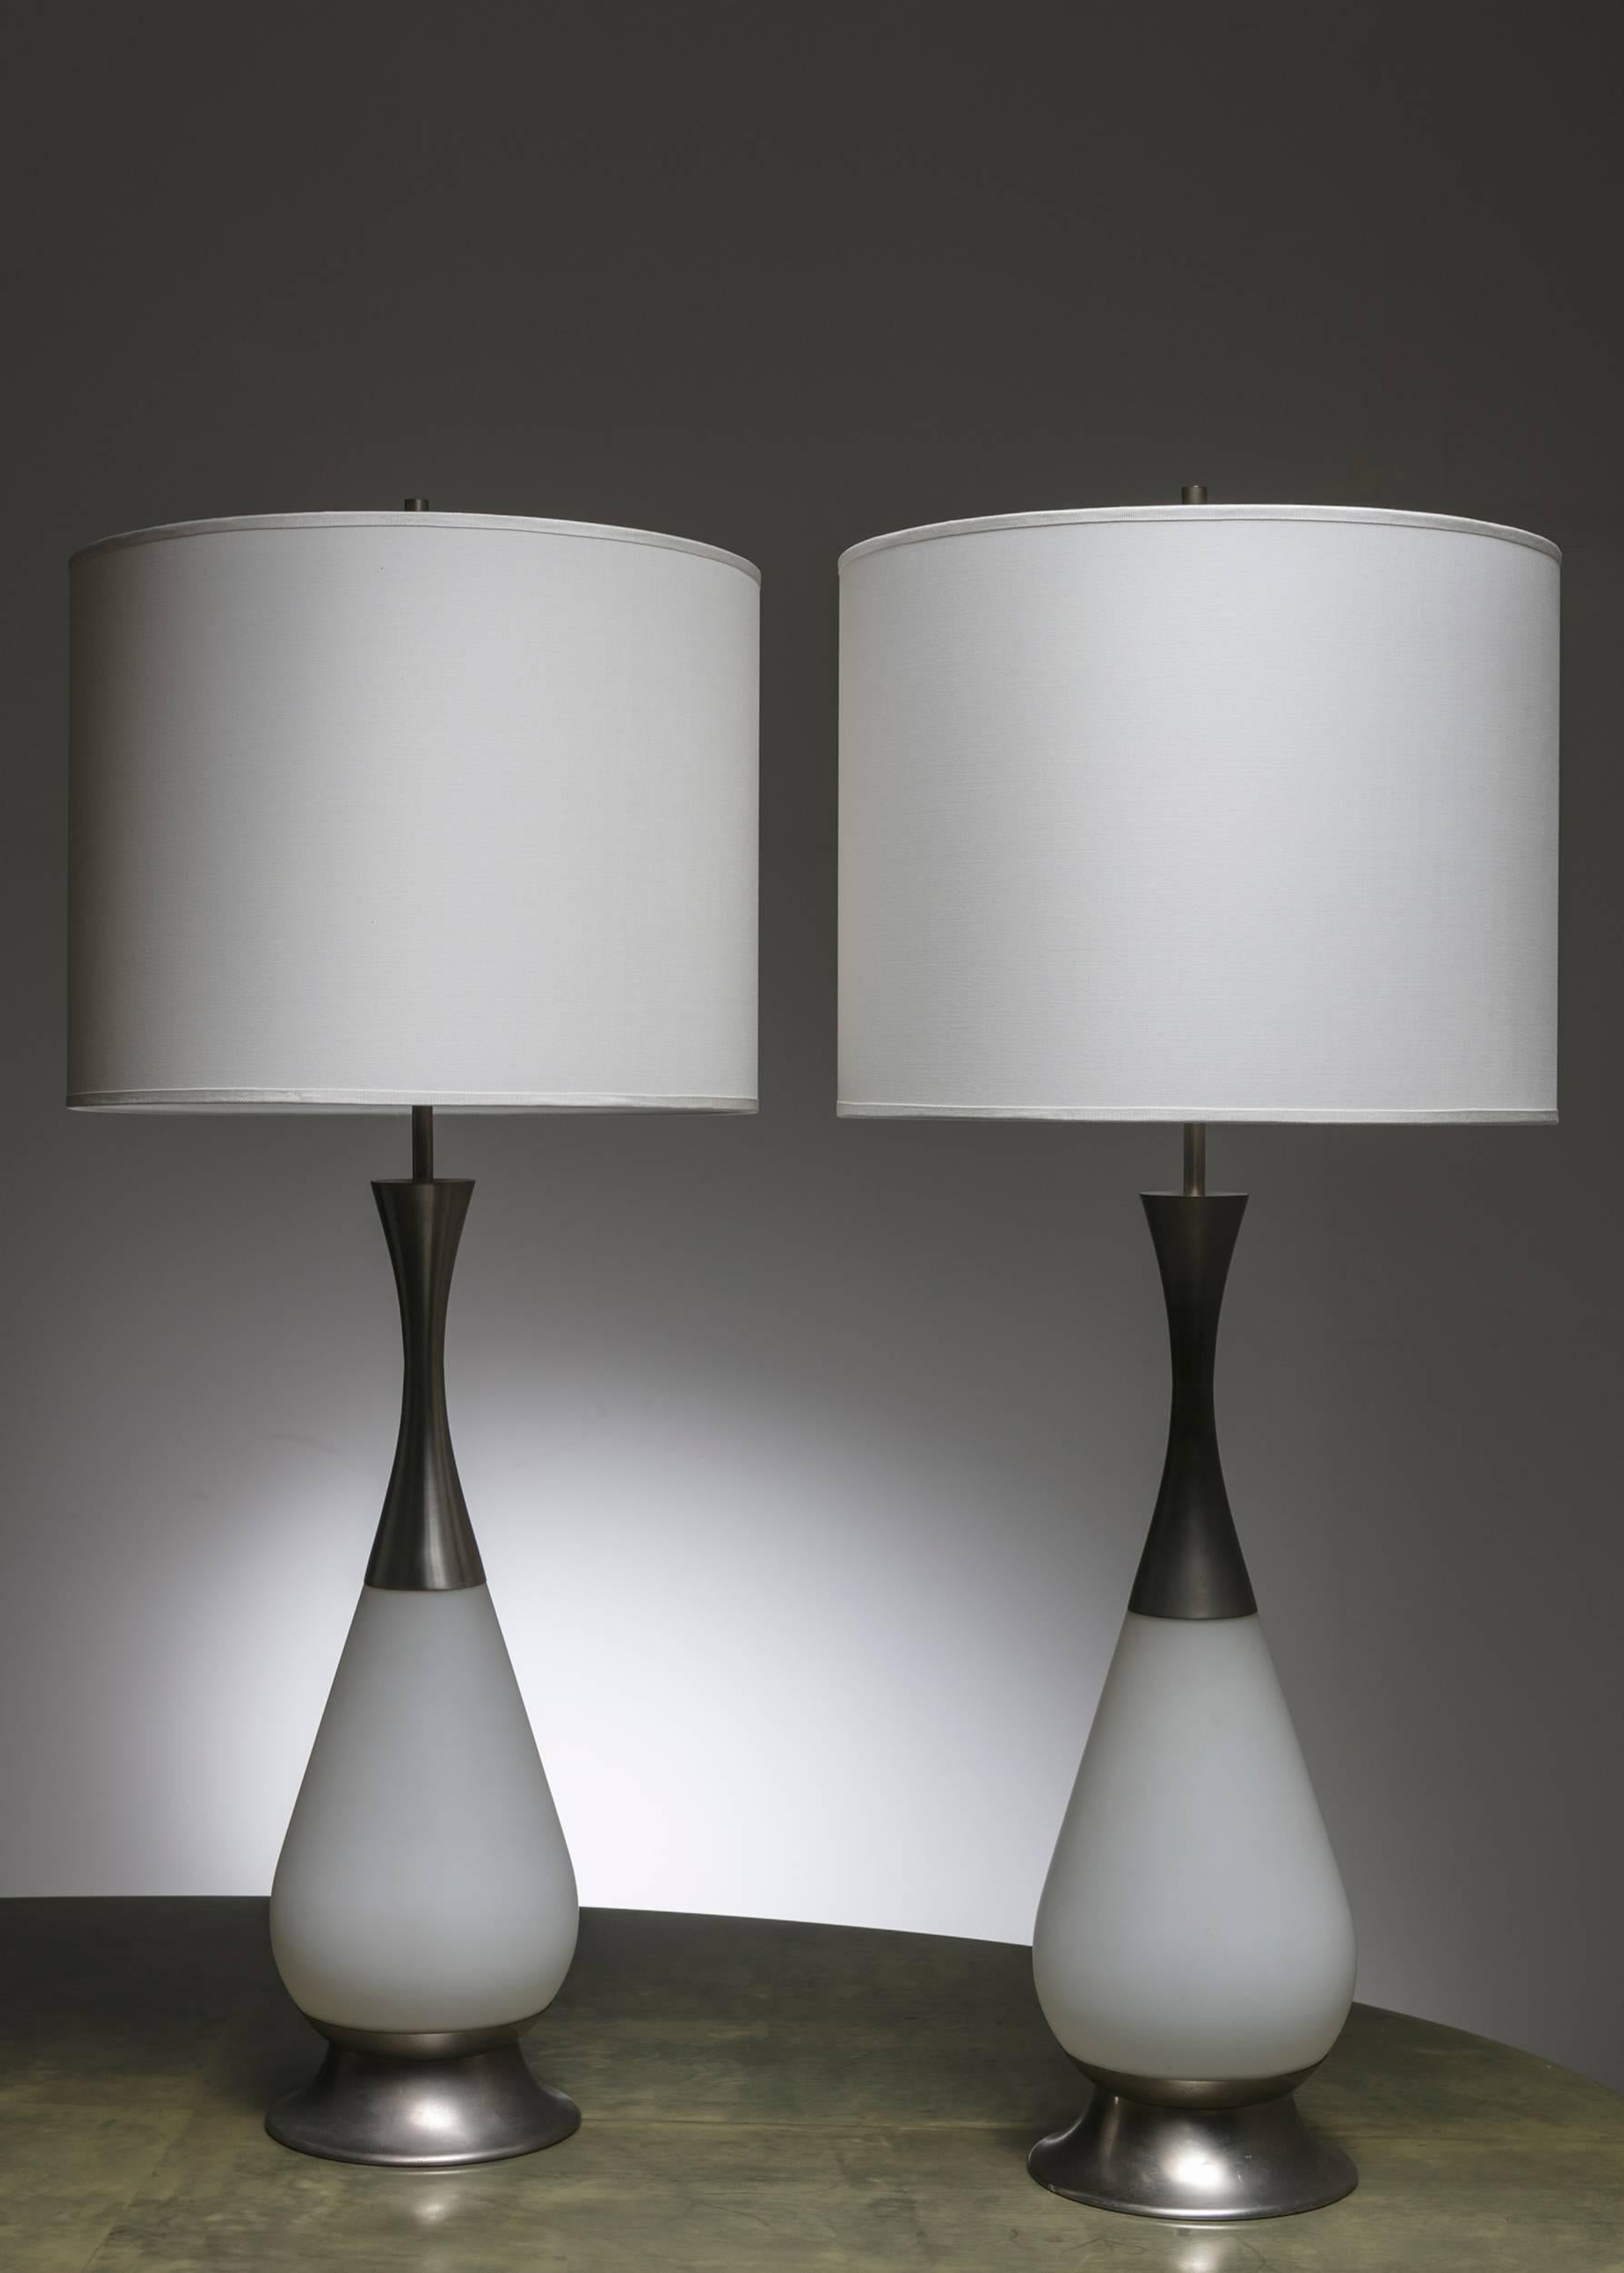 Scarce pair of table lamps by Stilnovo.
Huge pieces, with milky glass and aluminium details.
Following the Max Ingrand lesson for Fontana Arte, this piece has two-light sources, one inside the glass base and the other on the top.